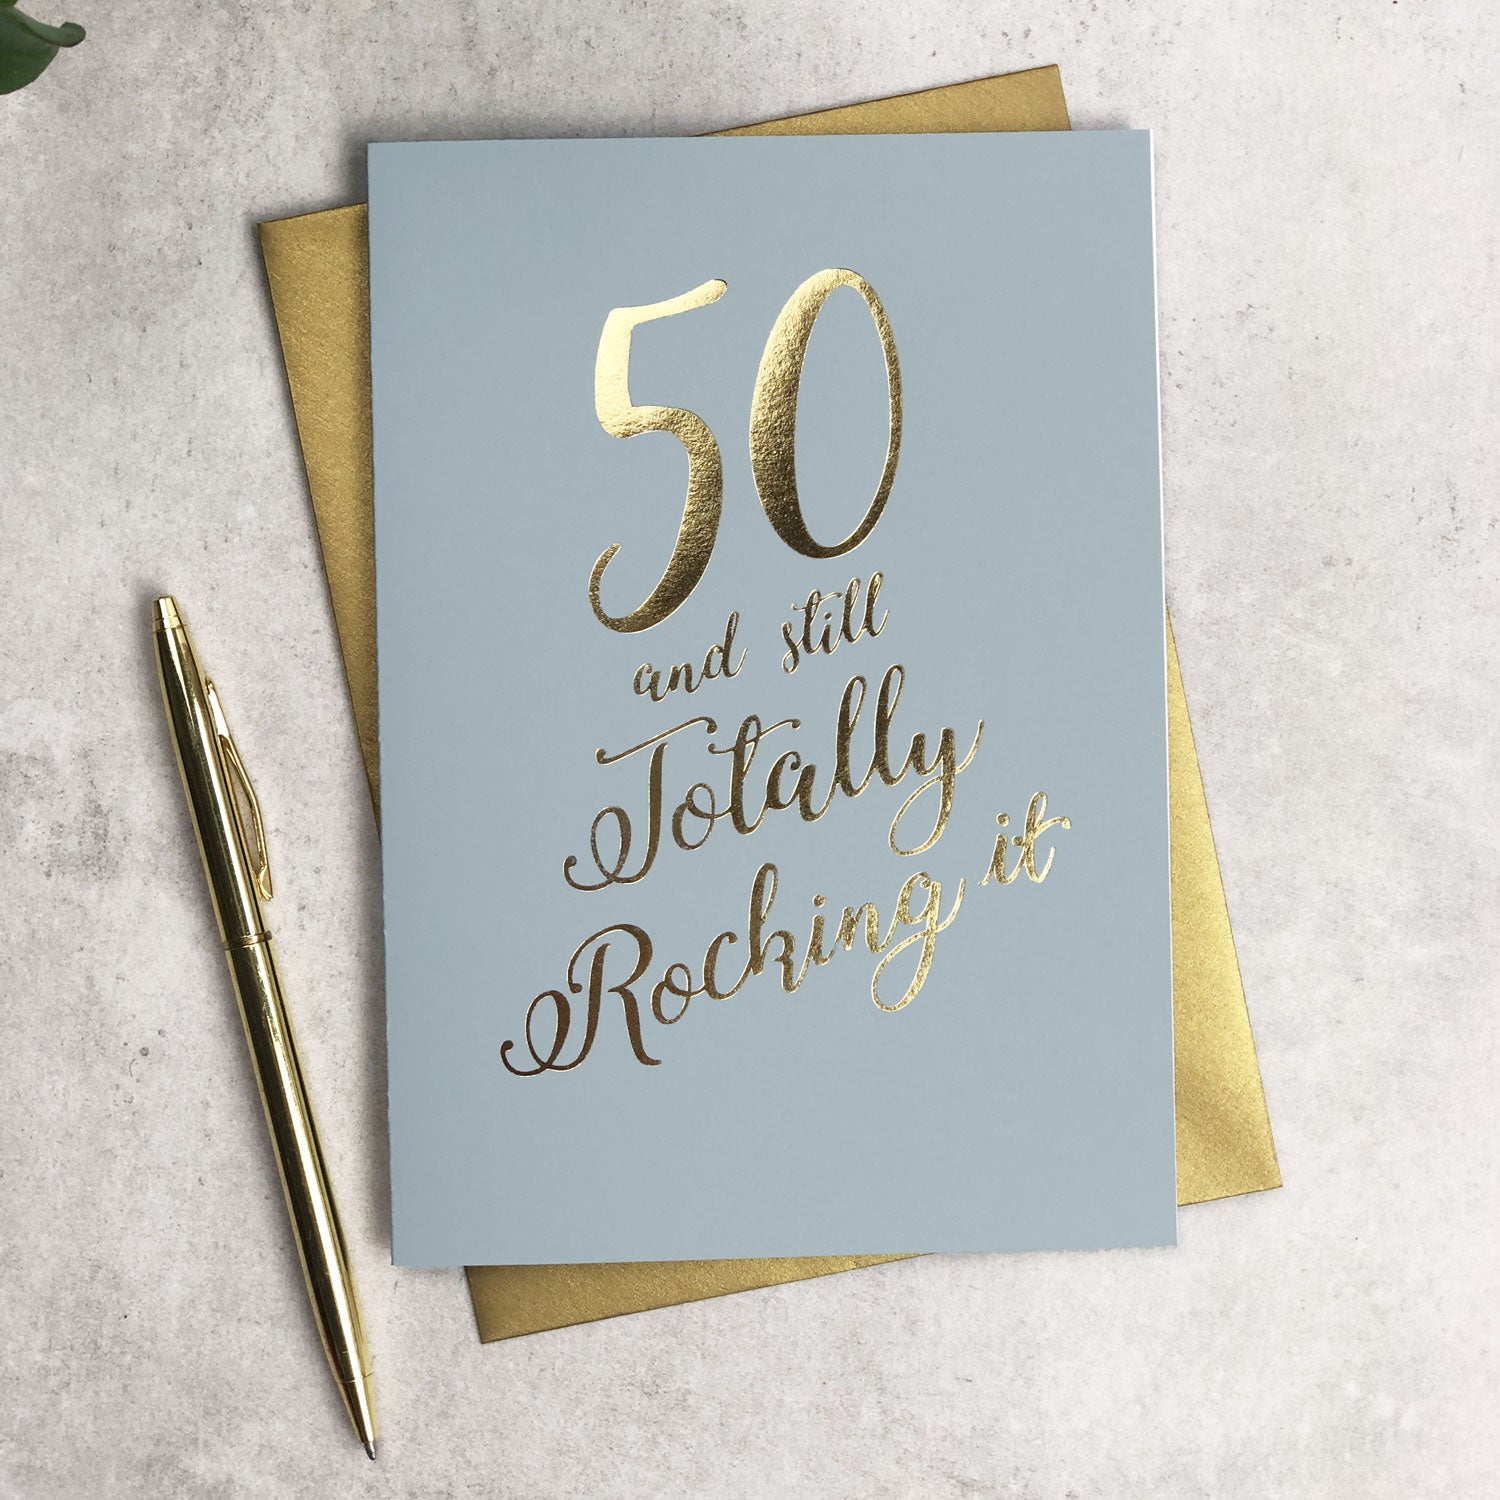 Funny 50 and Still Totalling Rocking It Birthday Card